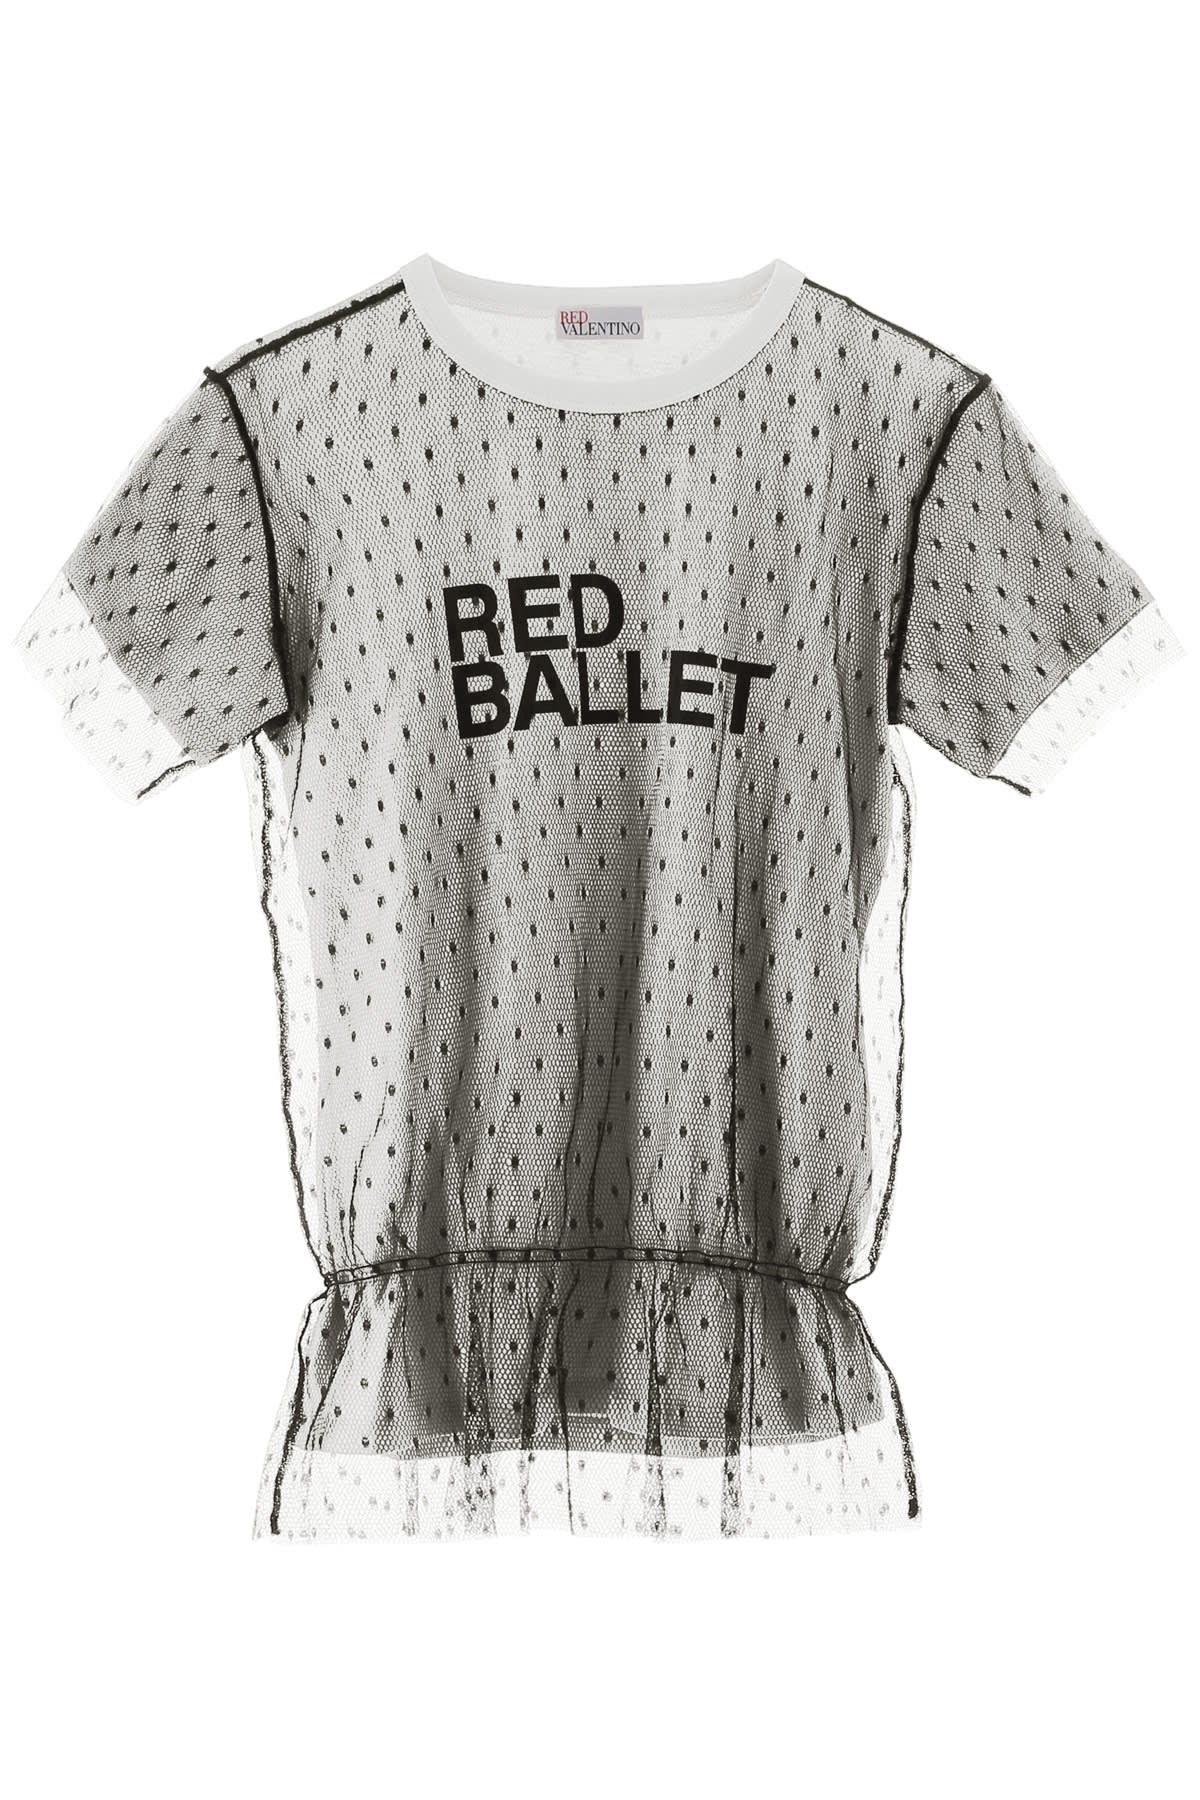 RED VALENTINO RED BALLET T-SHIRT,11224987